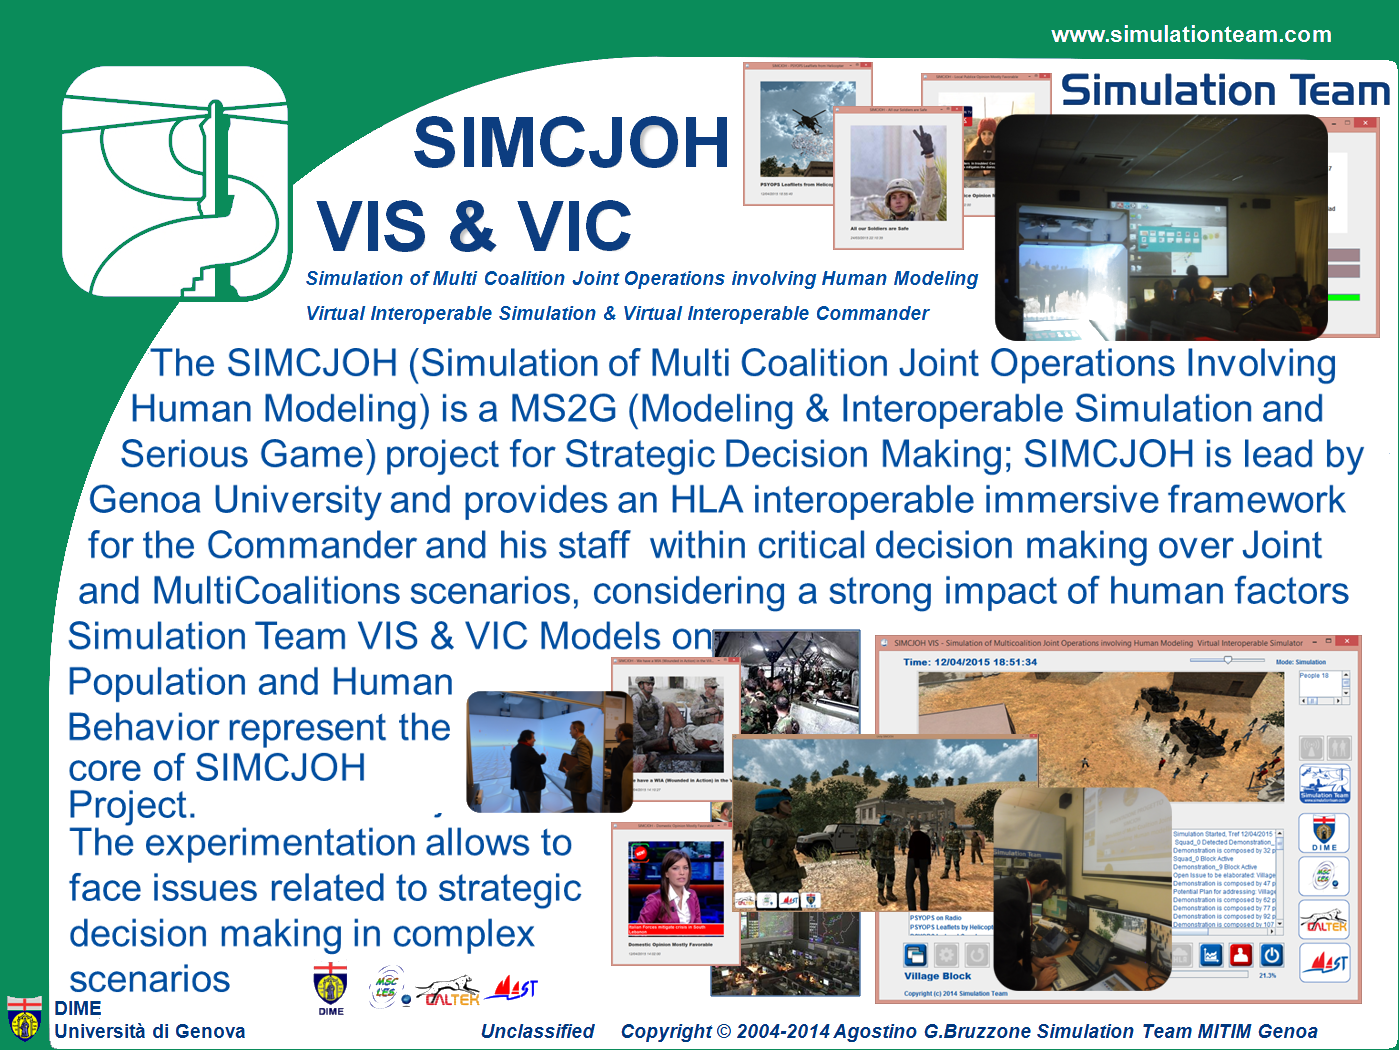 SIMCJOH VIS & VIC Simulation of Multi Coalition Joint Operations involving Human Modeling - Virtual Interoperable Simulation & Virtual Interoperable Commander